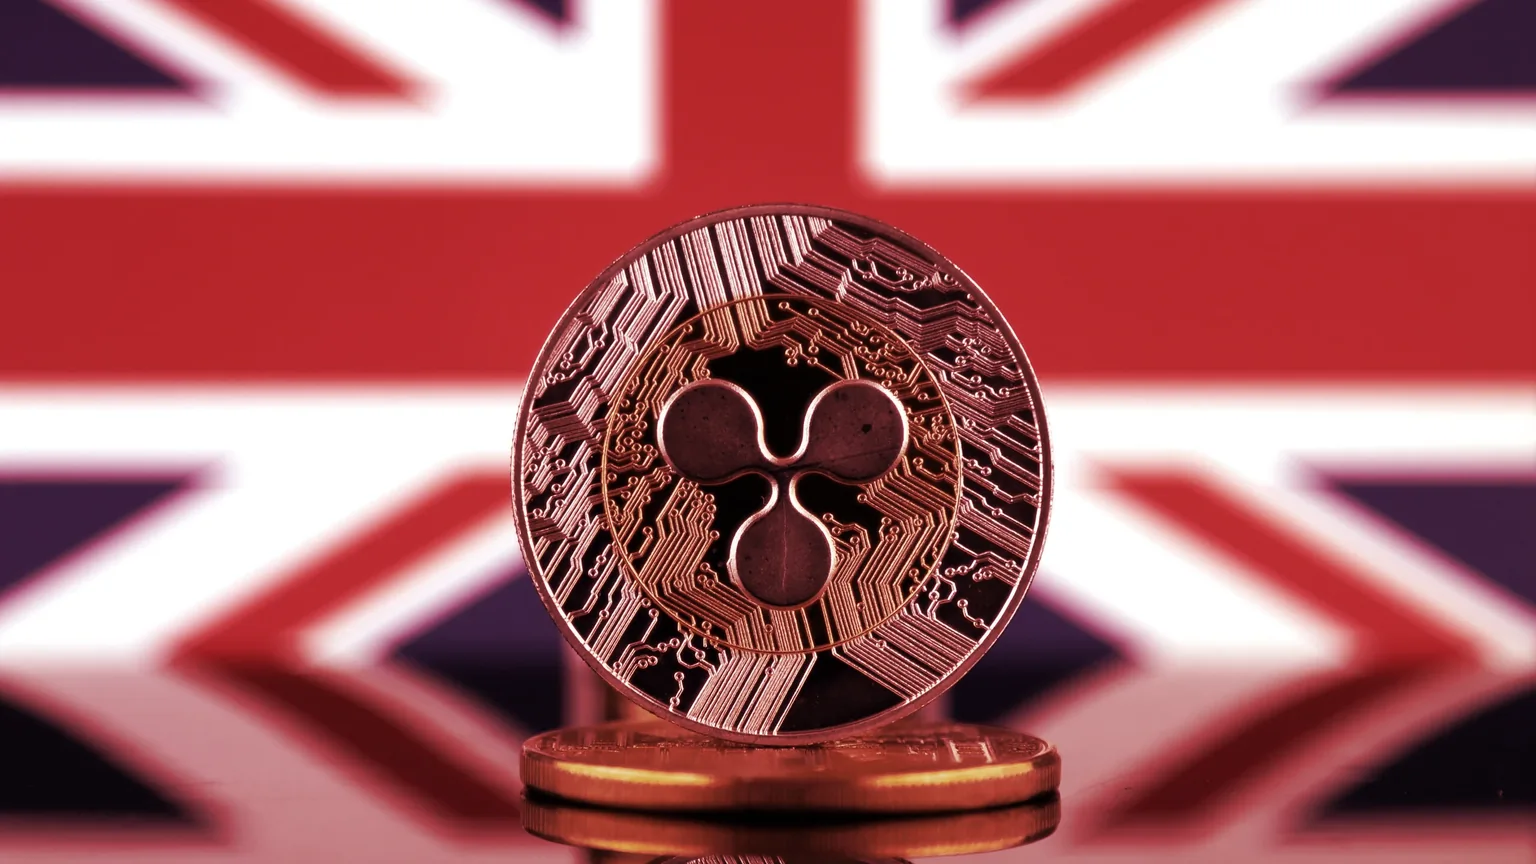 Relocating to the UK holds firm advantages for Ripple. Image: Shutterstock